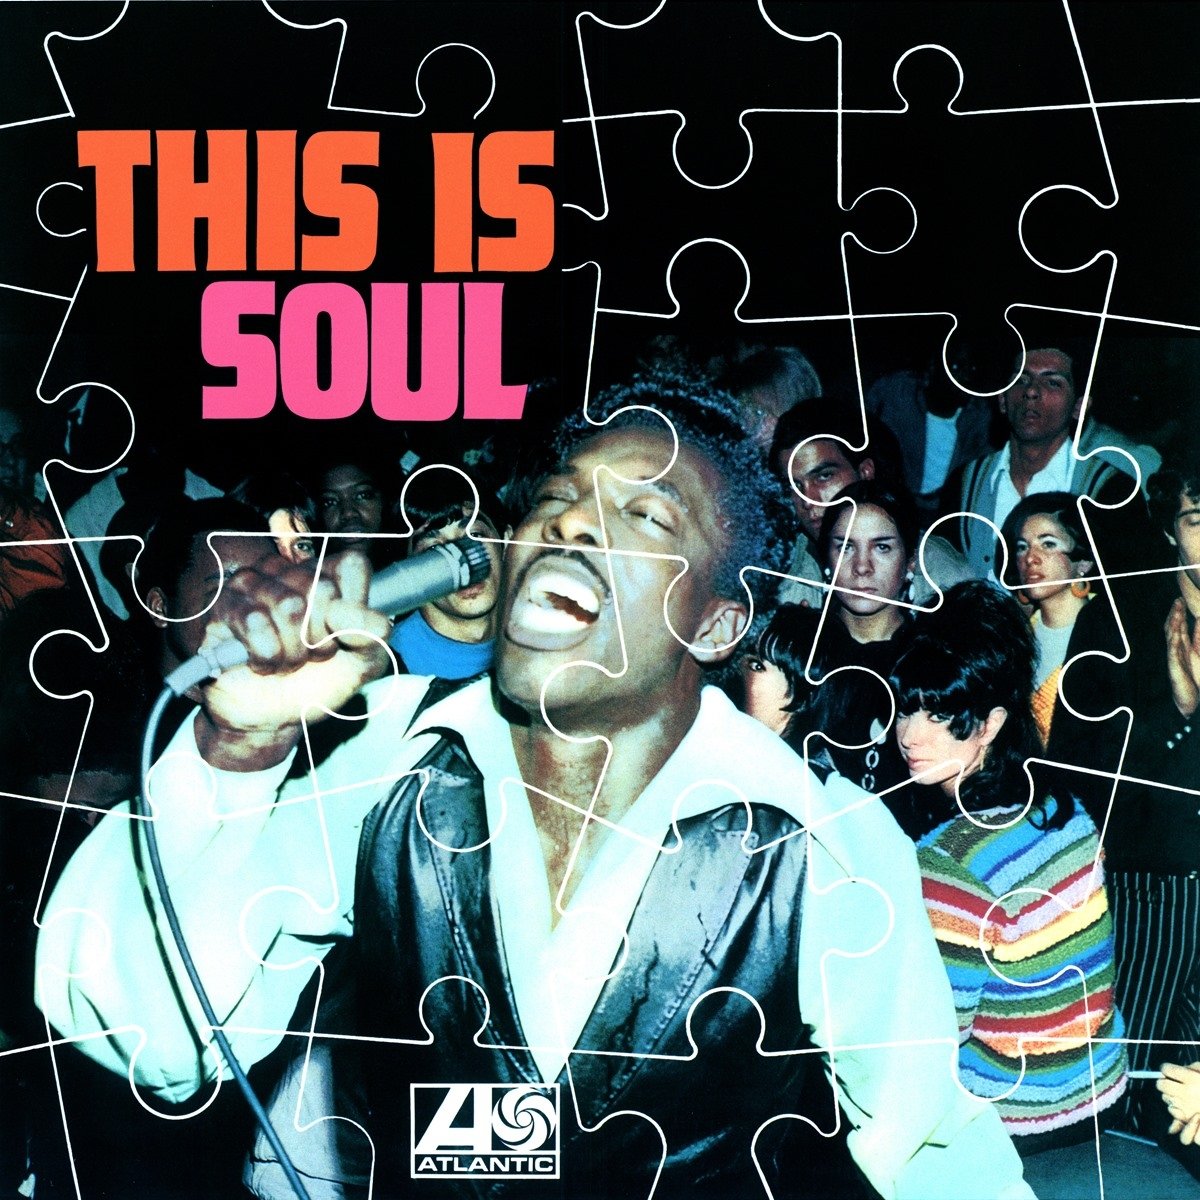 This Is Soul - This Is Soul vinyl cover